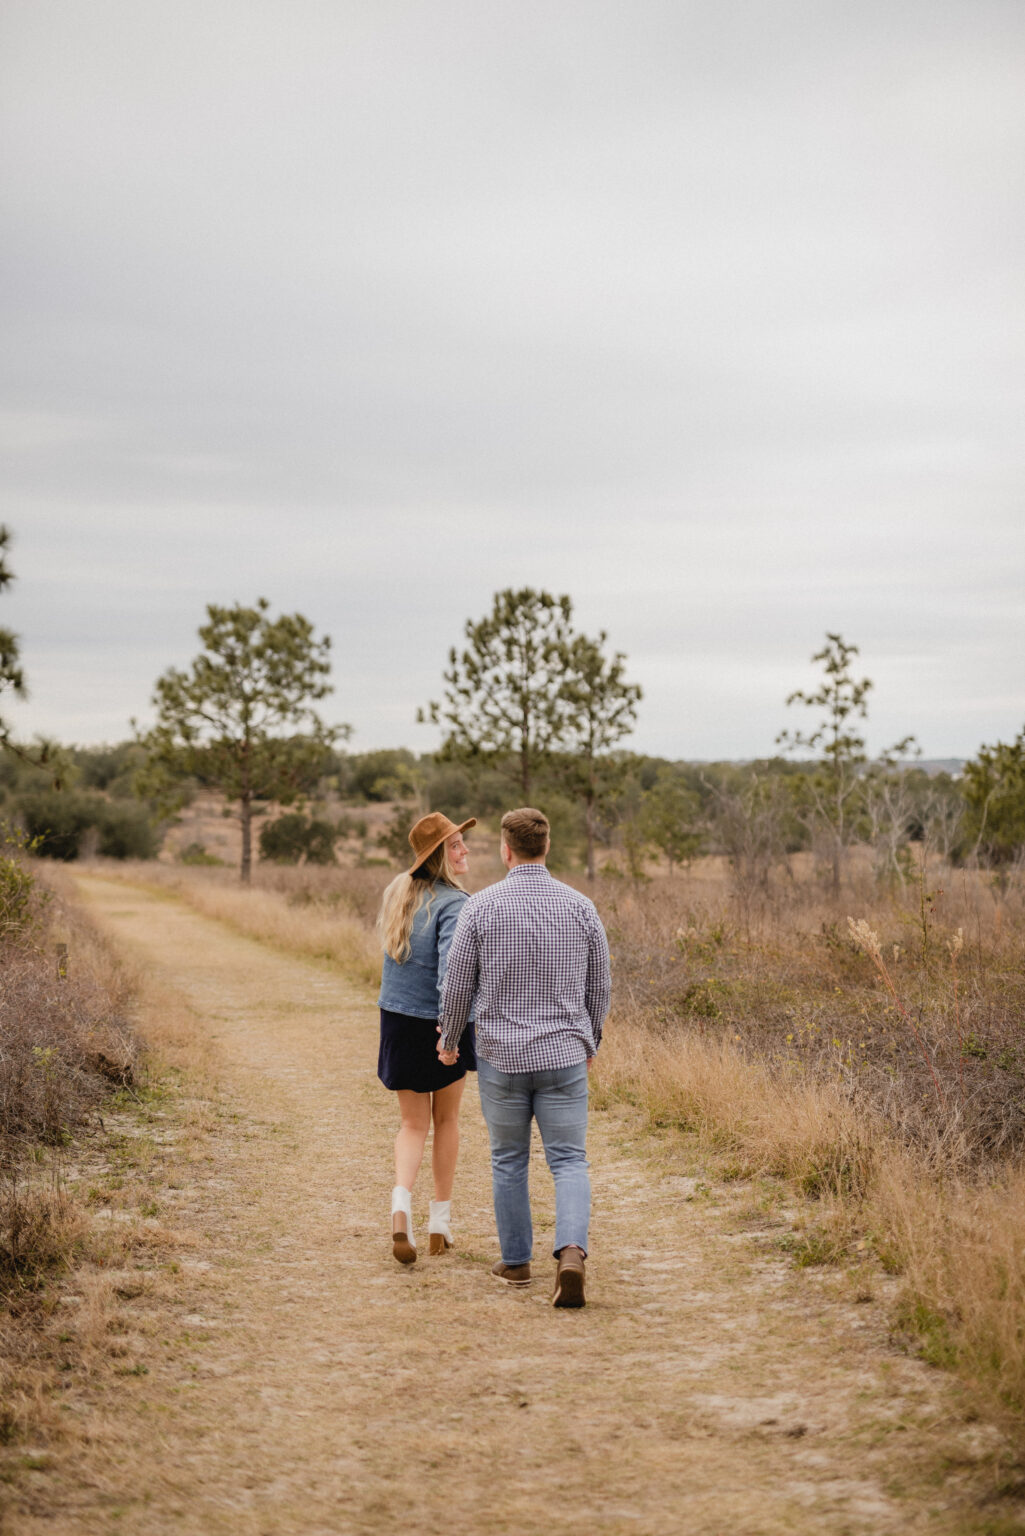 Lake Louisa State Park Engagement Central Florida Orlando Wedding Elopement Couples Photographer photography packages Local Proposal Portraits